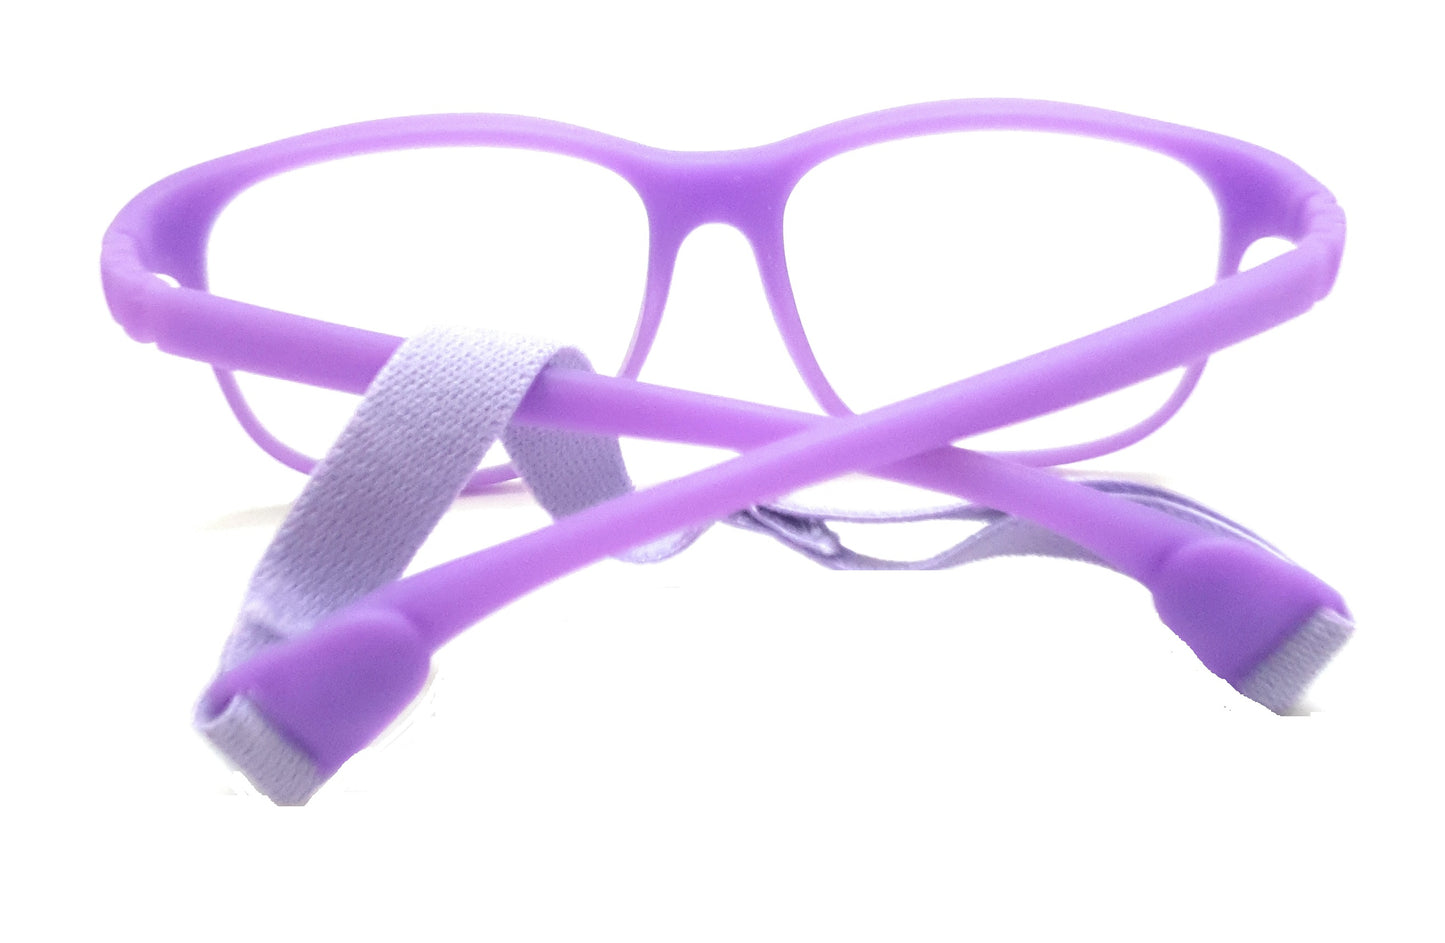 Affaires Blue Ray Block glasses Frames for Kids, Flexible, Bendable, No Screws, Glasses with anti-reflection | BC-283 (Purple)